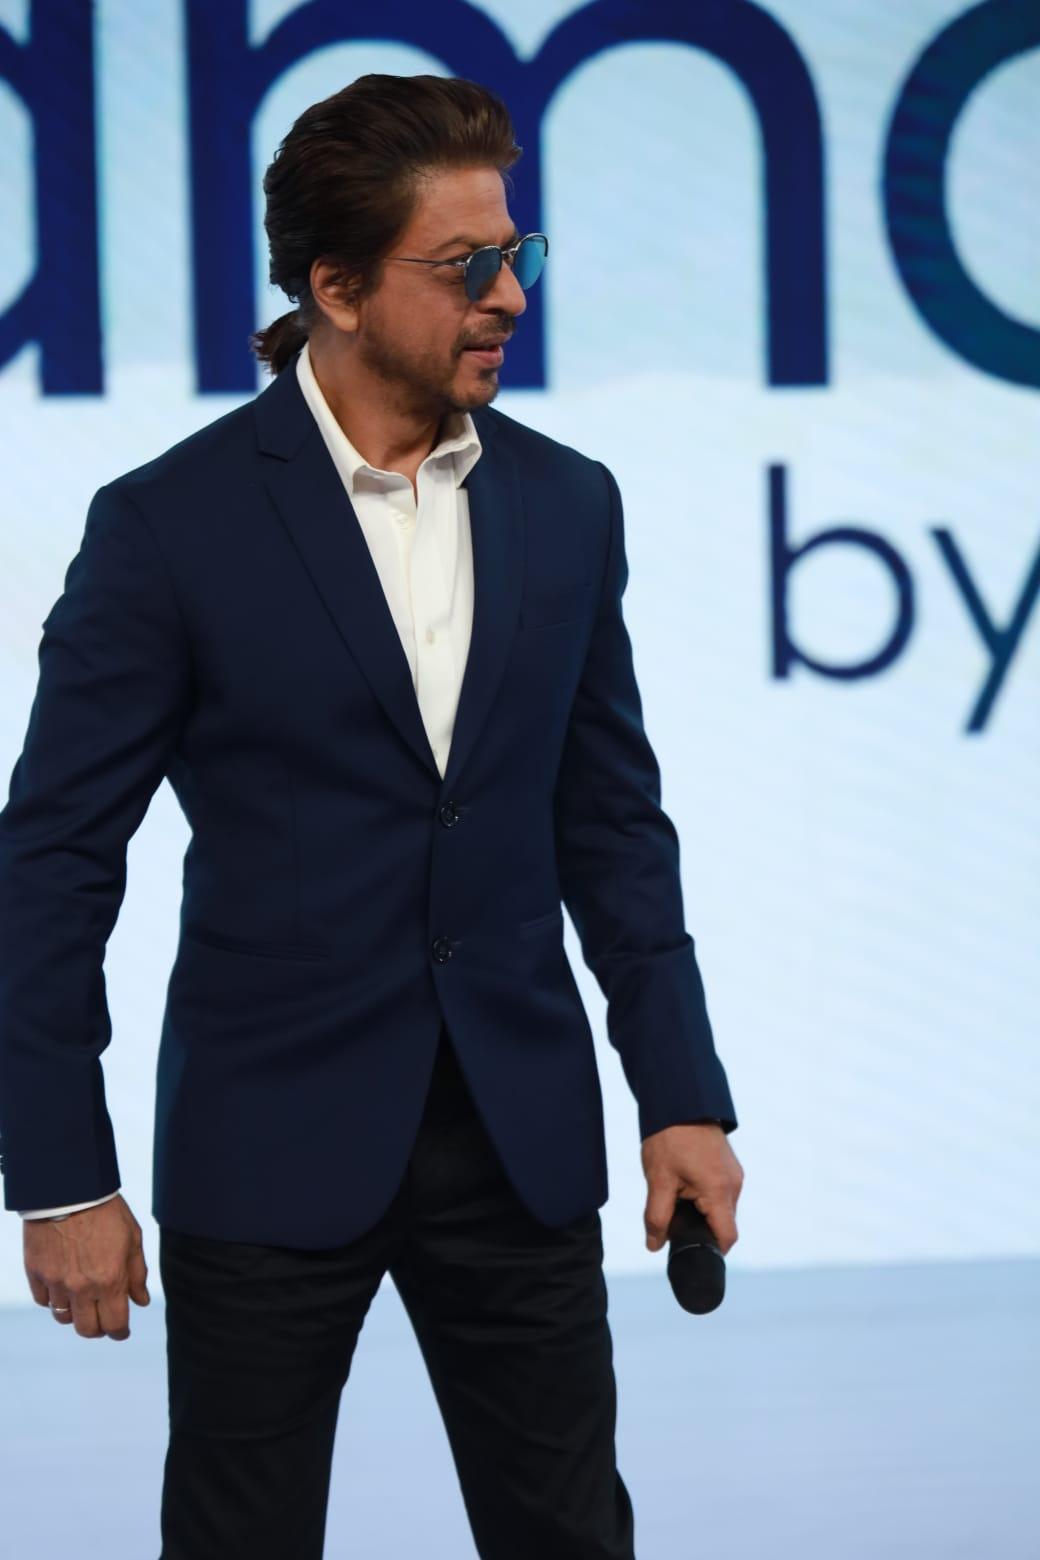 Shah Rukh Khan was spotted at an event in Delhi